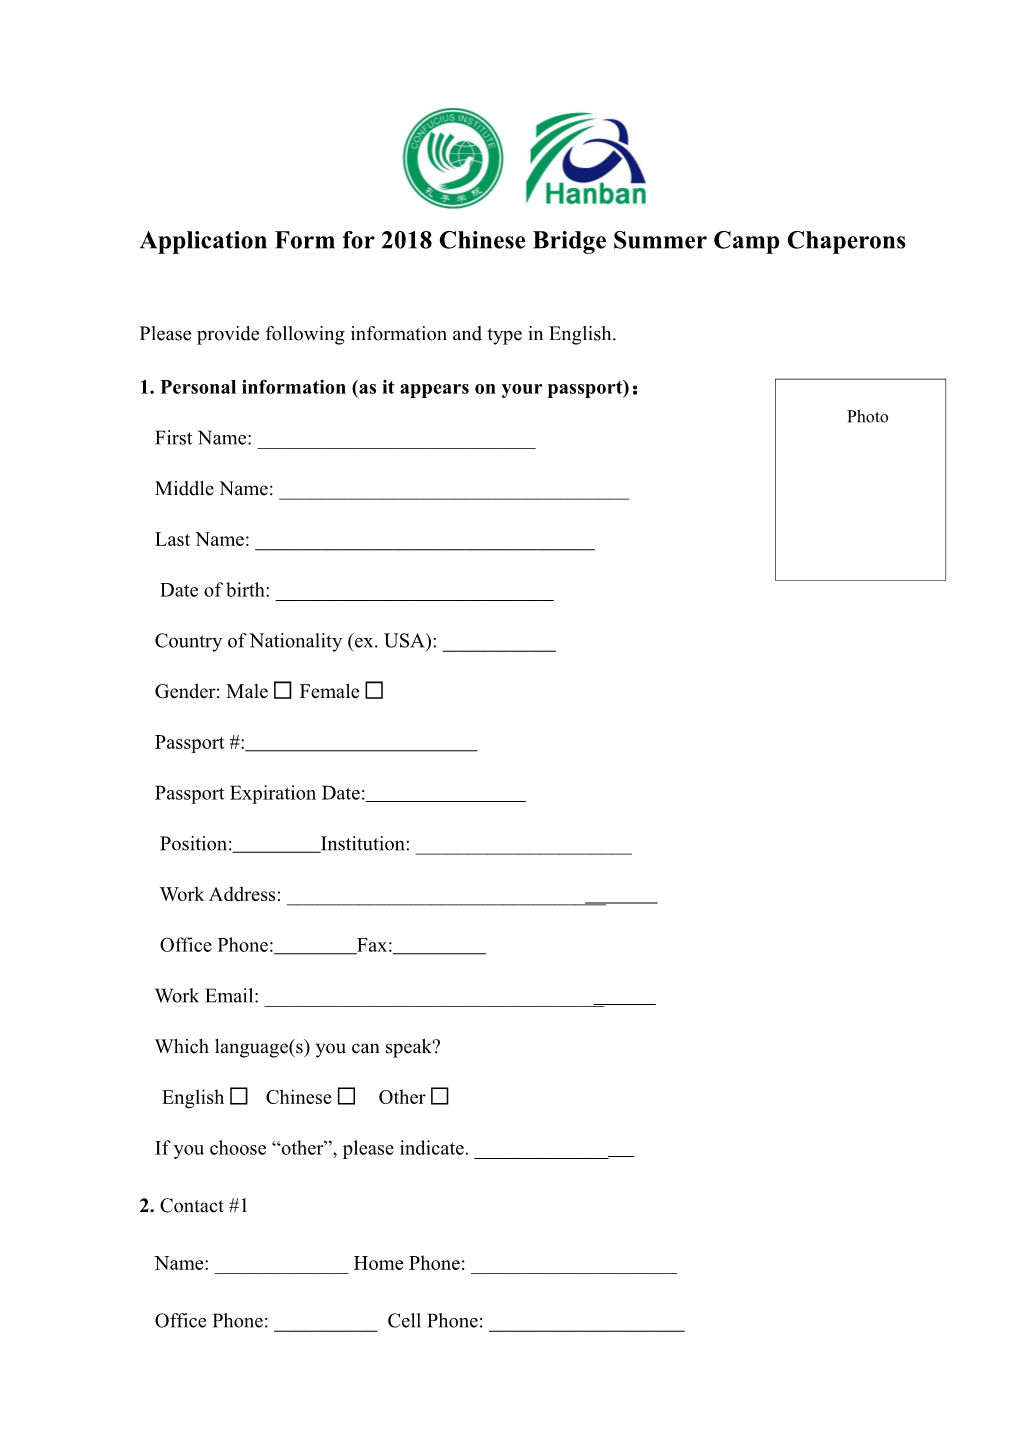 Application Form for 2018Chinese Bridge Summer Camp Chaperons